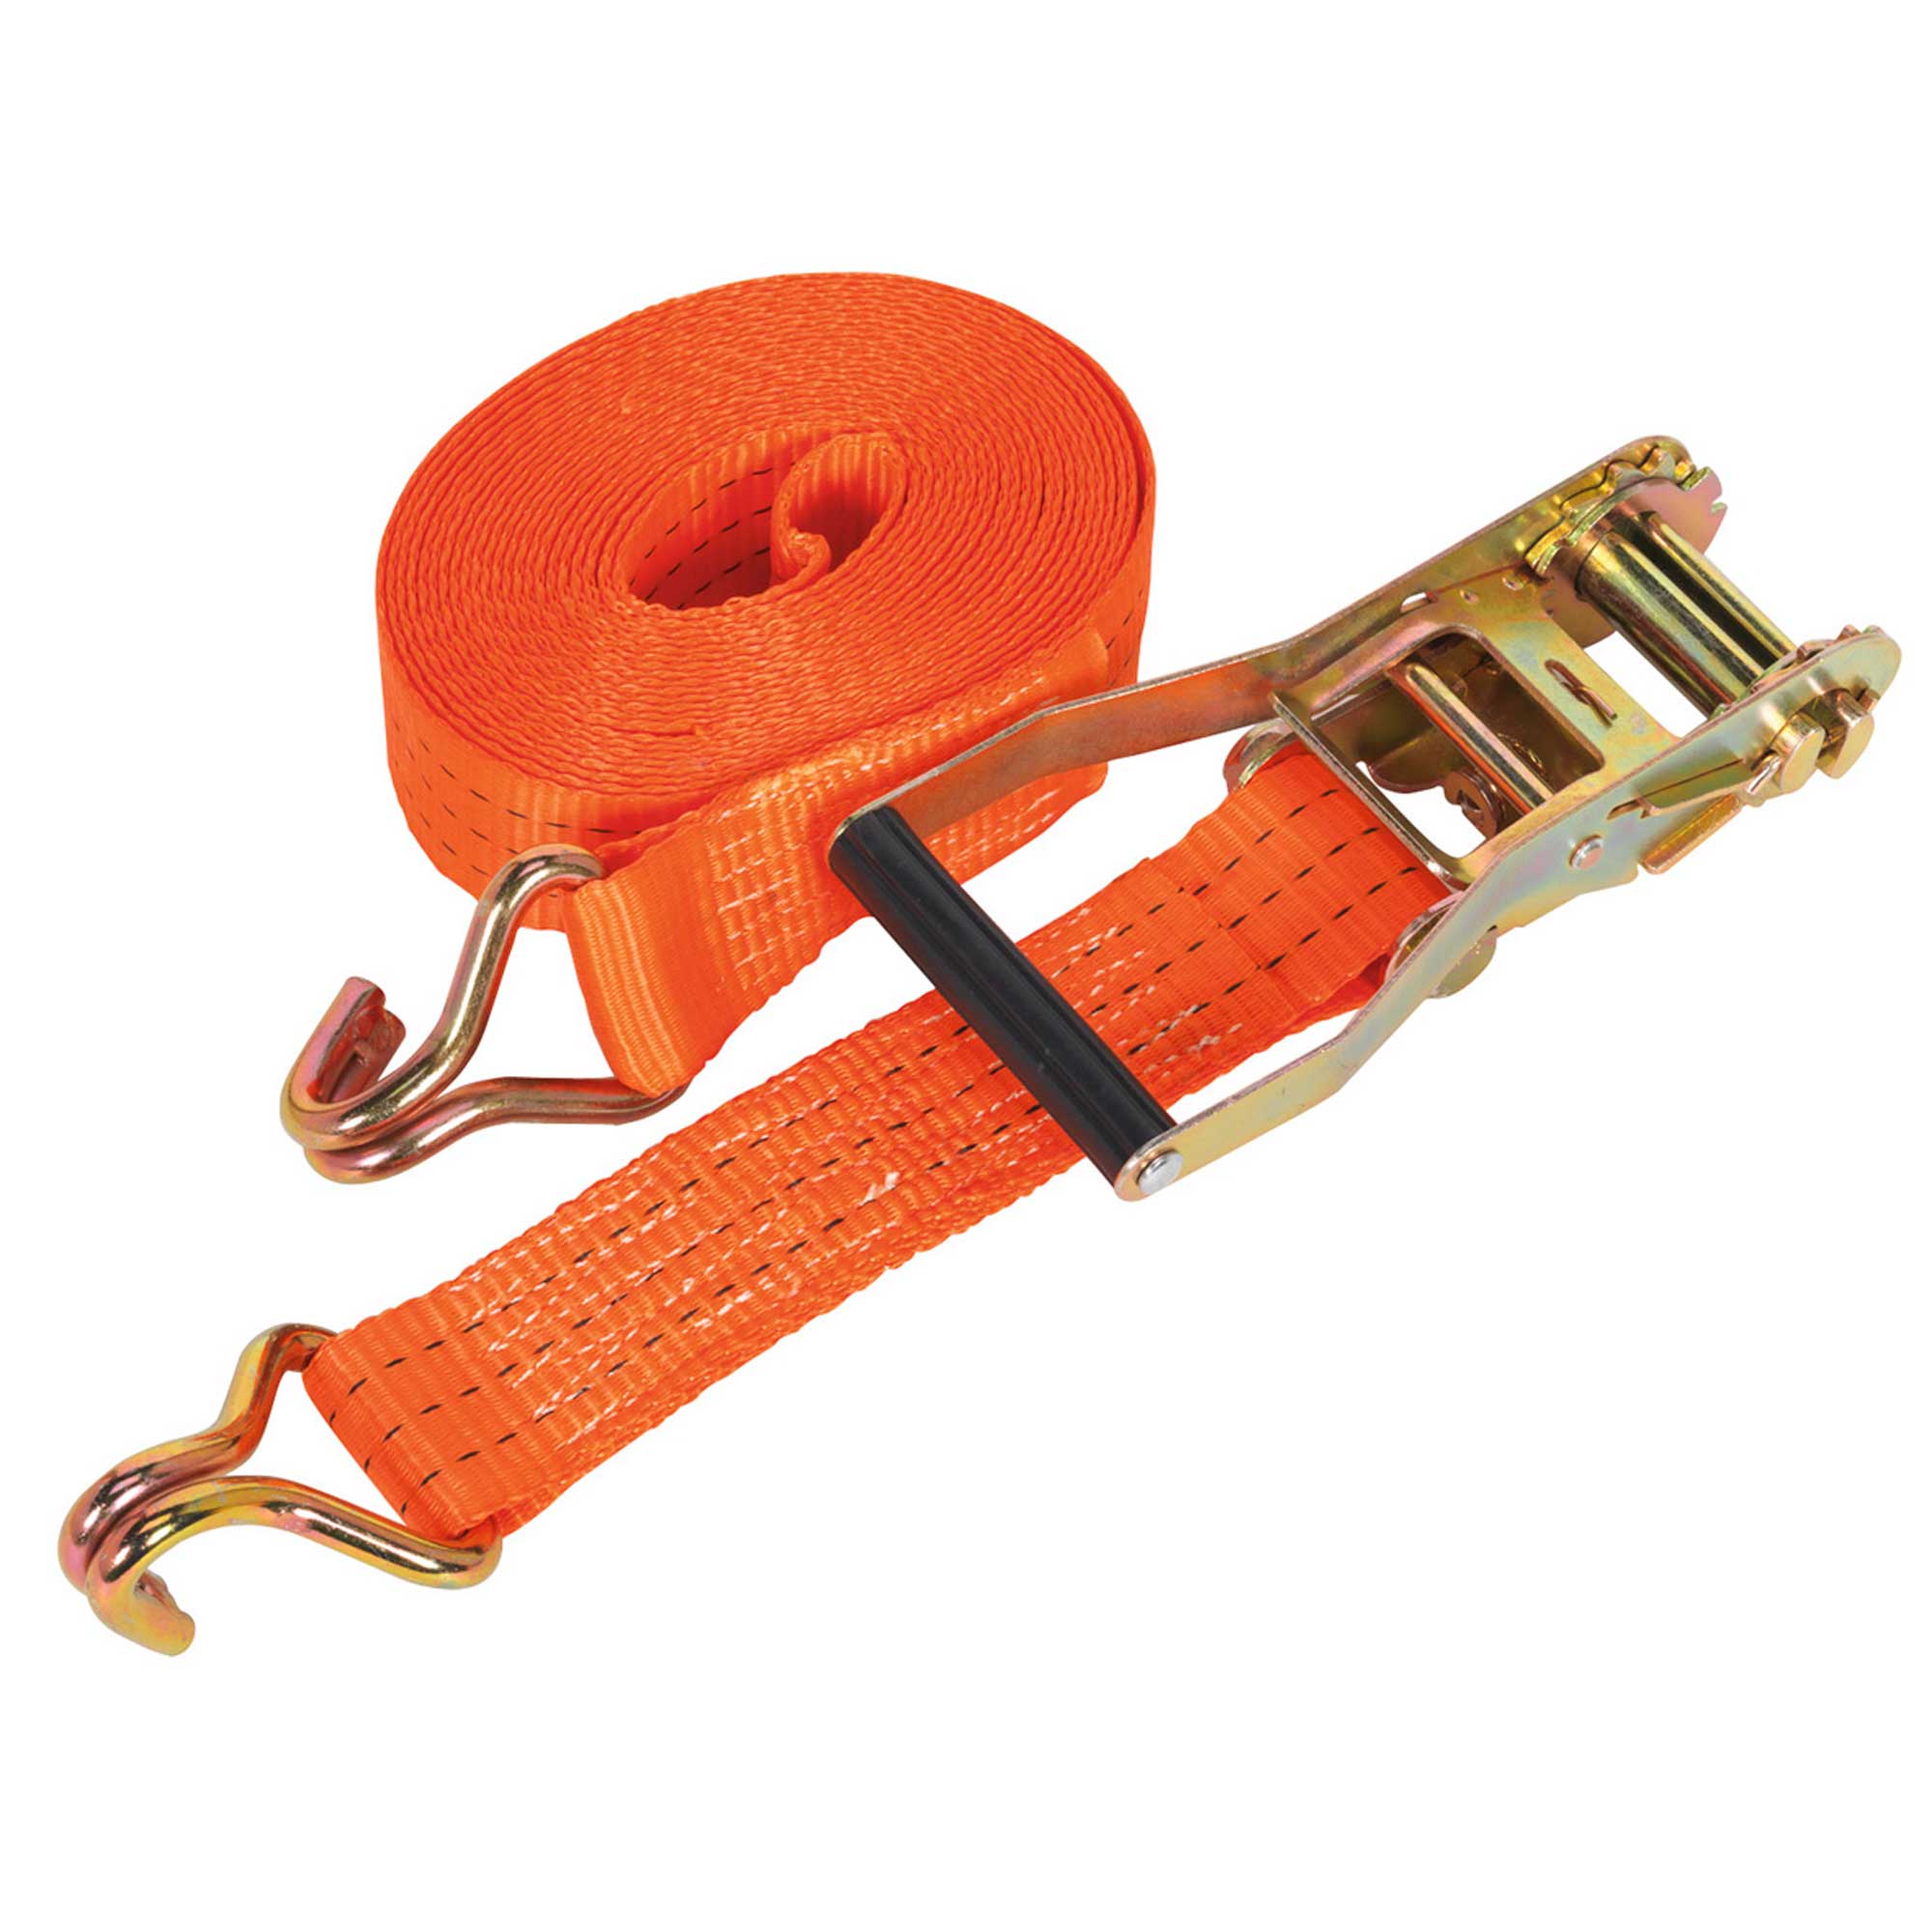 Sealey Ratchet Tie Down 50mm x 10m Polyester Webbing 3000kg Load Test ...